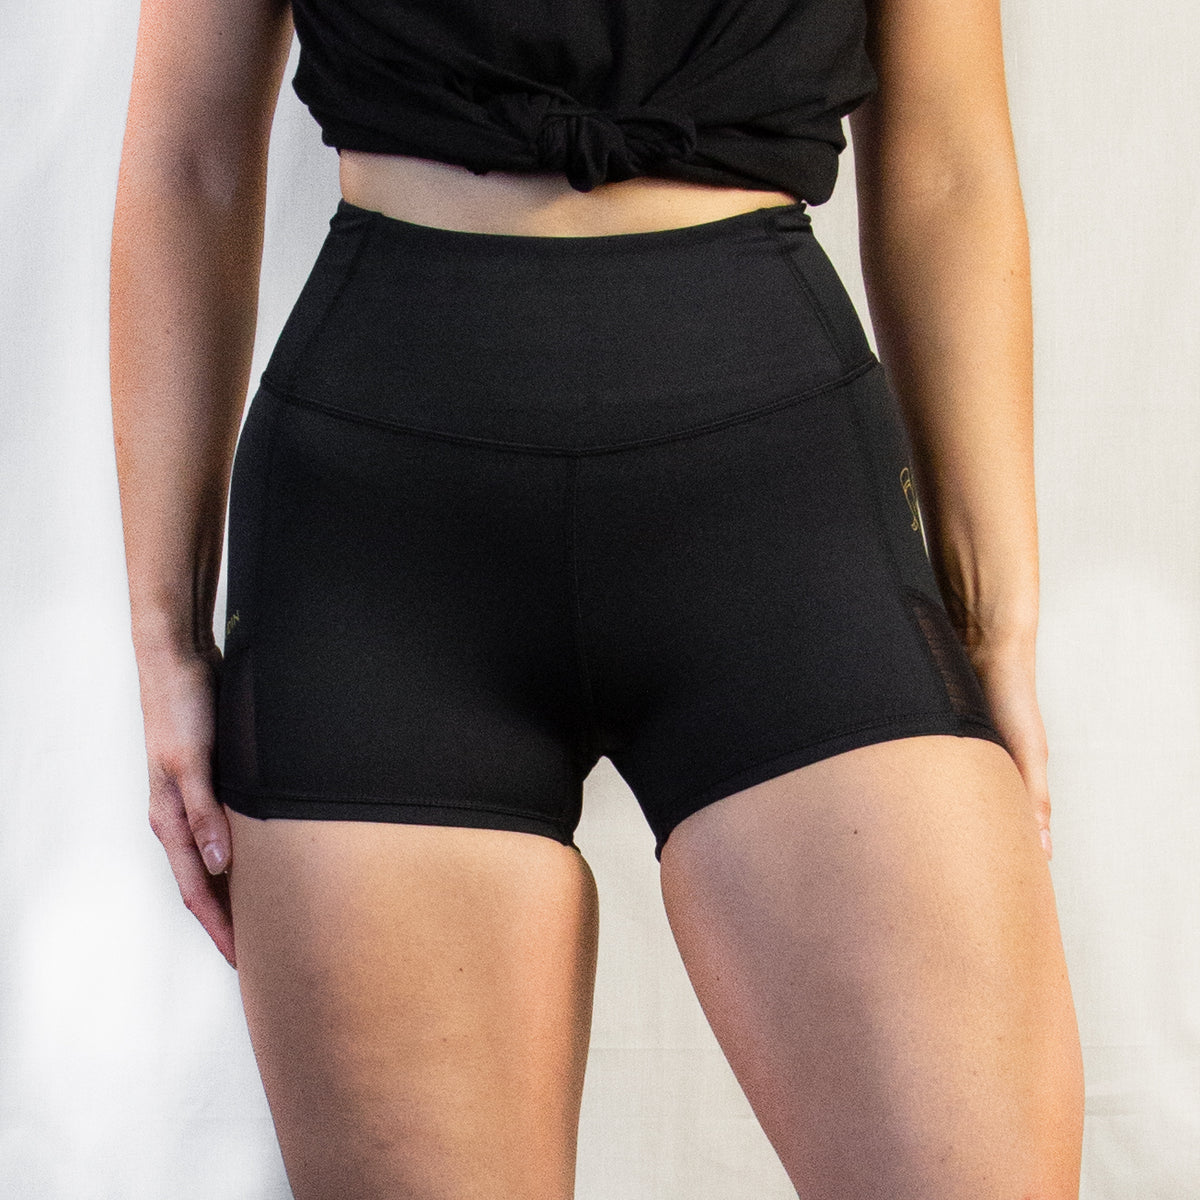 Women's Compression Shorts, Black performance gym shorts with gold detailing and mesh panelling